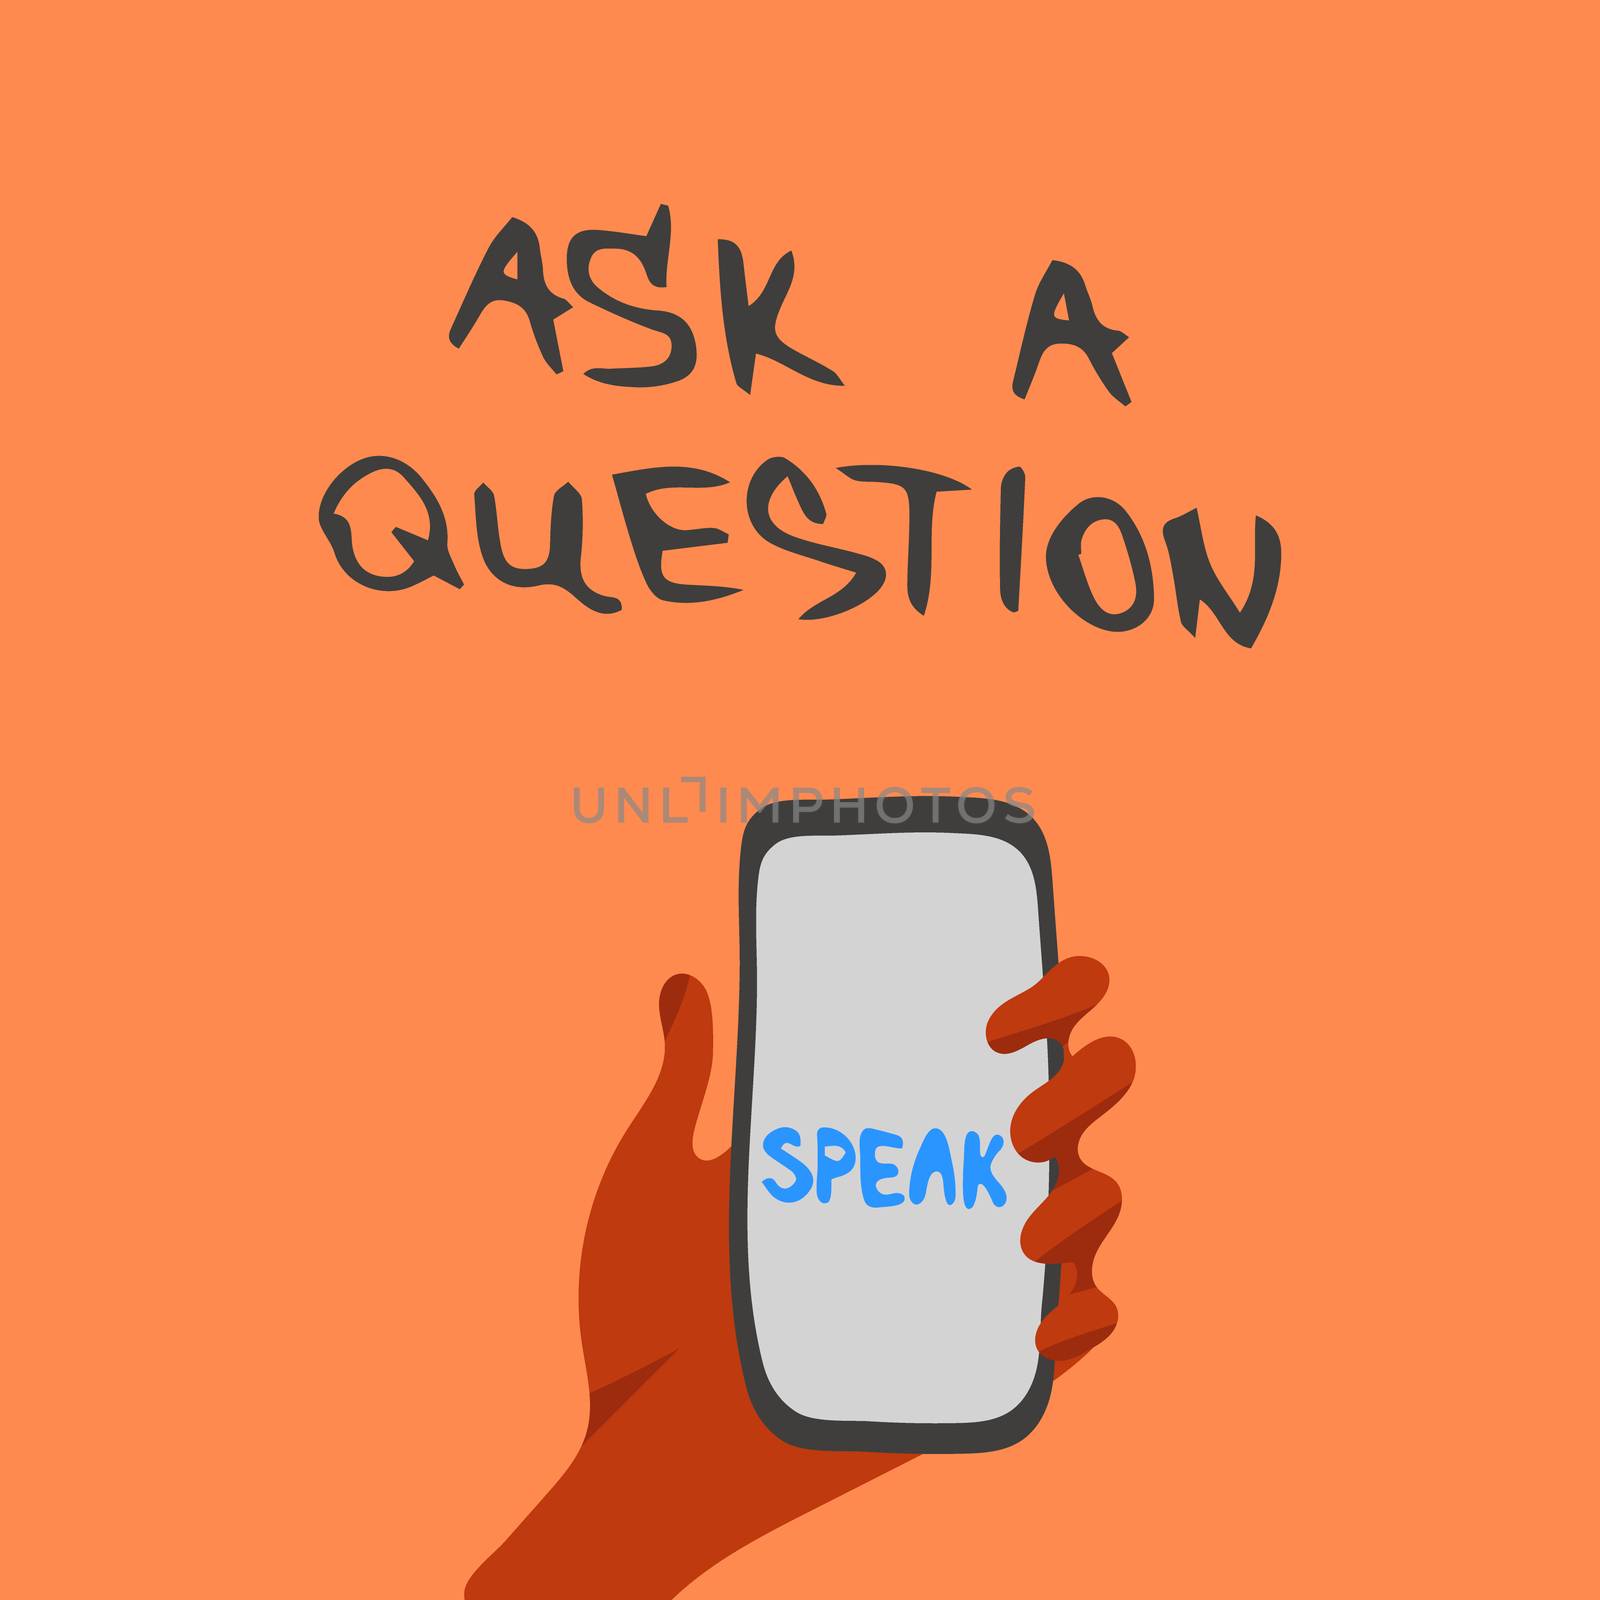 Hand holding a smartphone, ask a question smart device. Voice recognition illustration. 